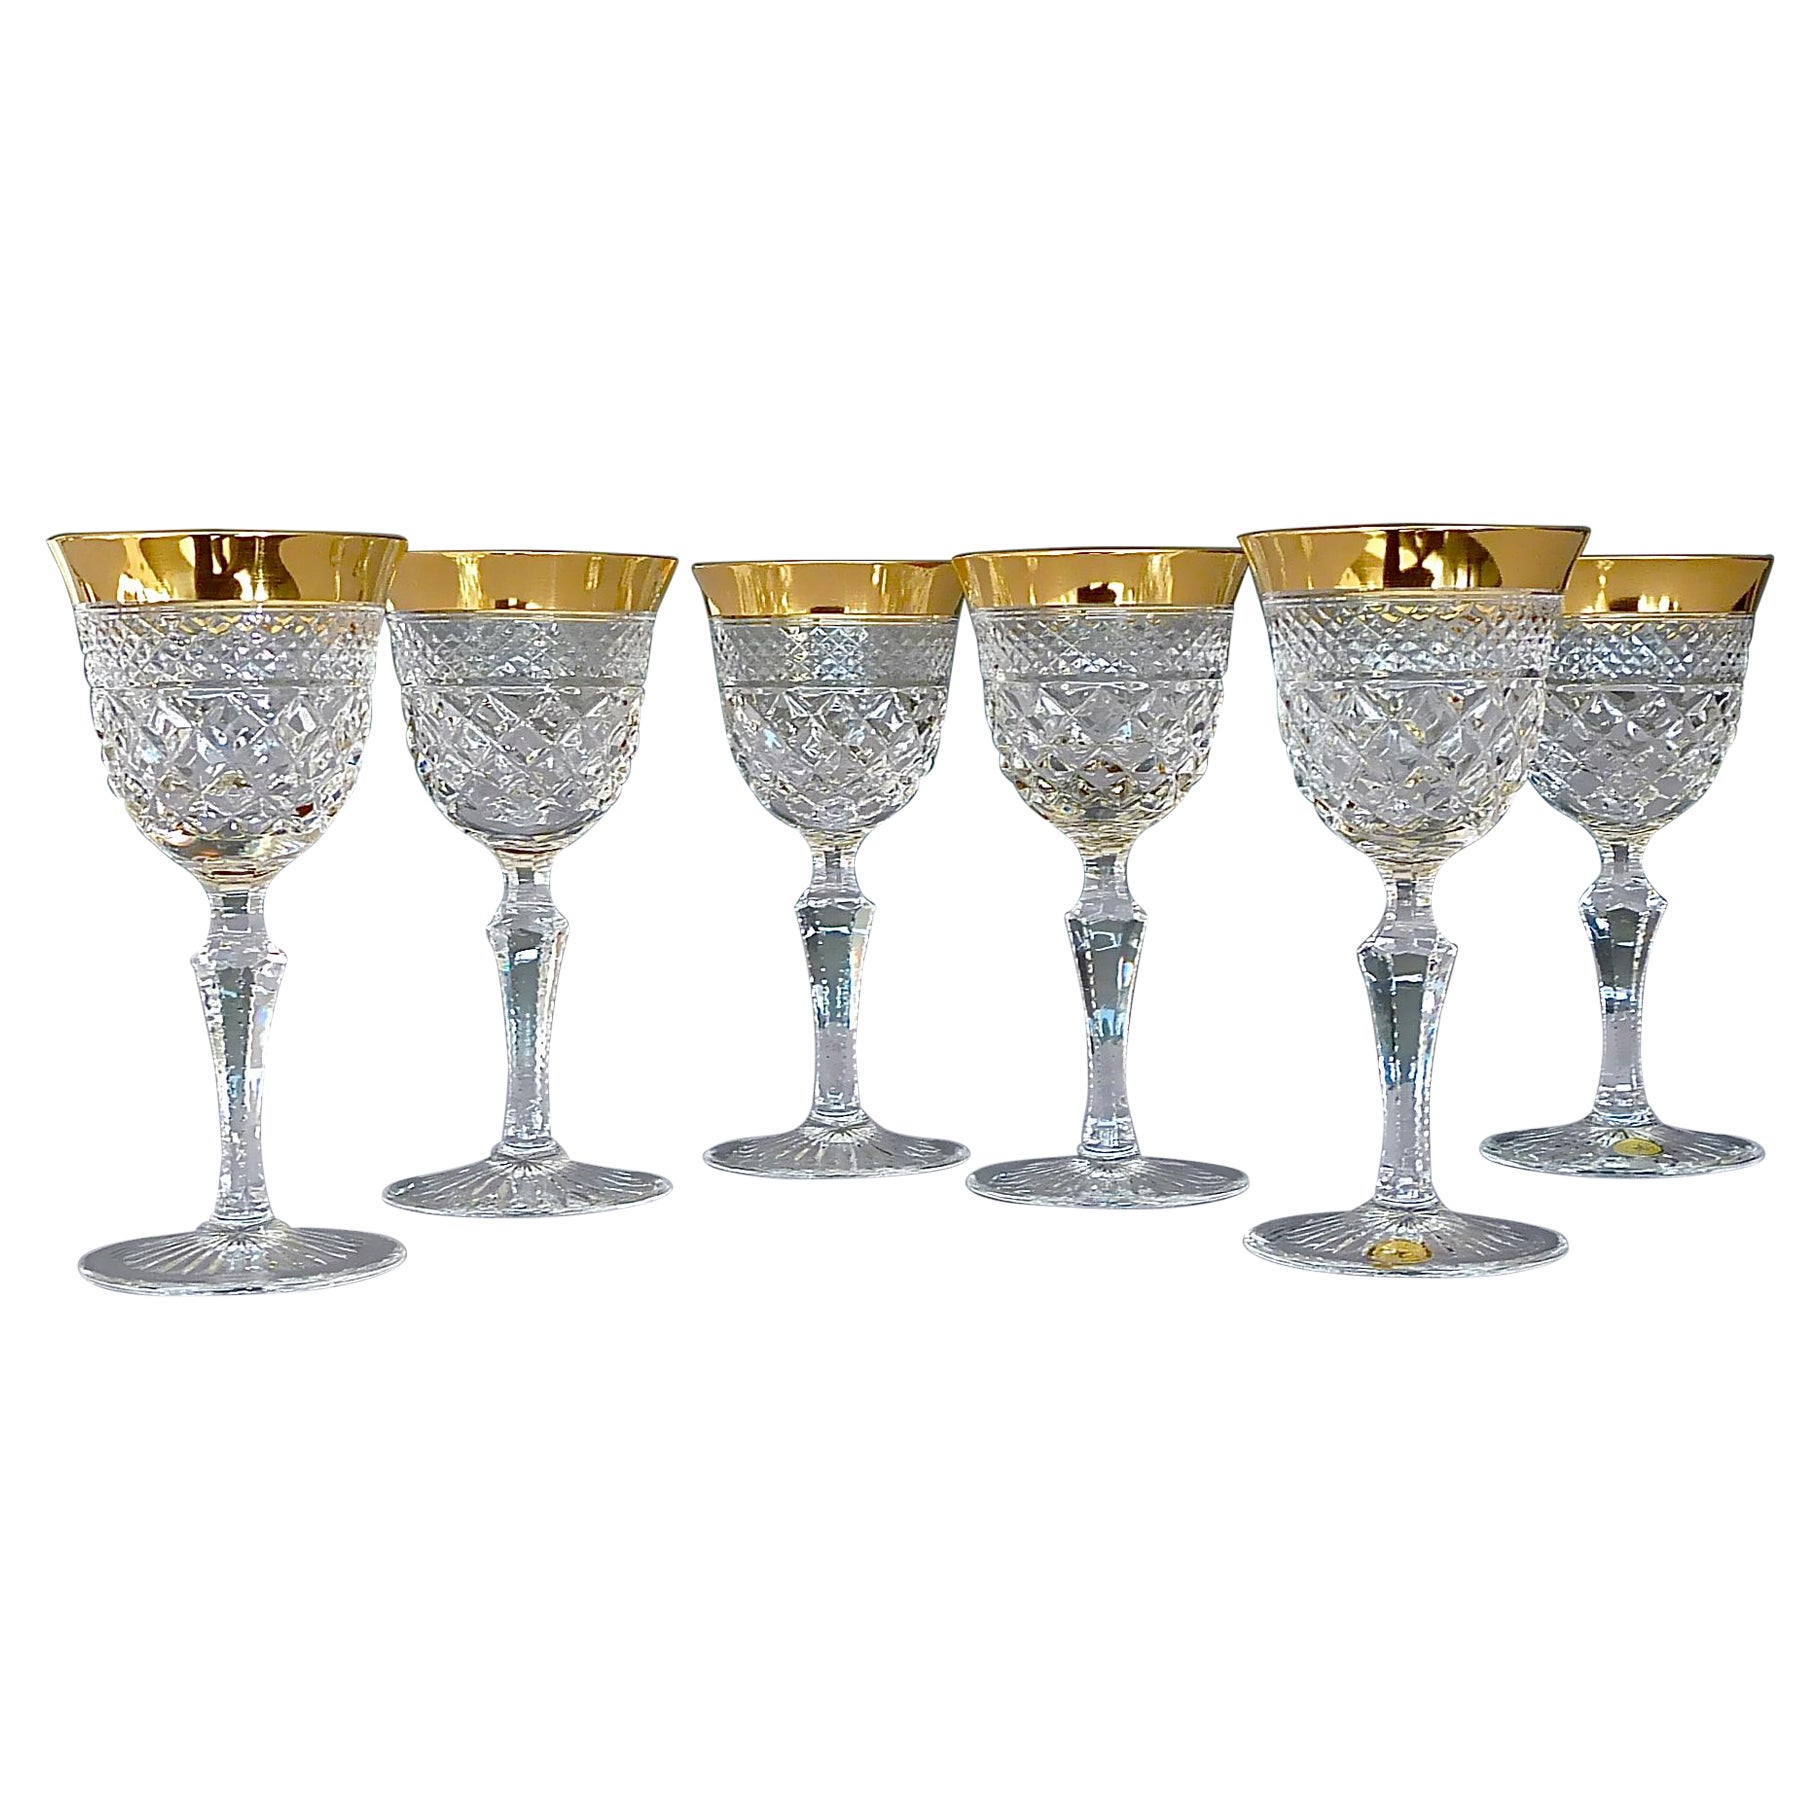 Precious 6 Wine Glasses Gold Crystal Faceted Stemware Josephinenhuette Moser For Sale